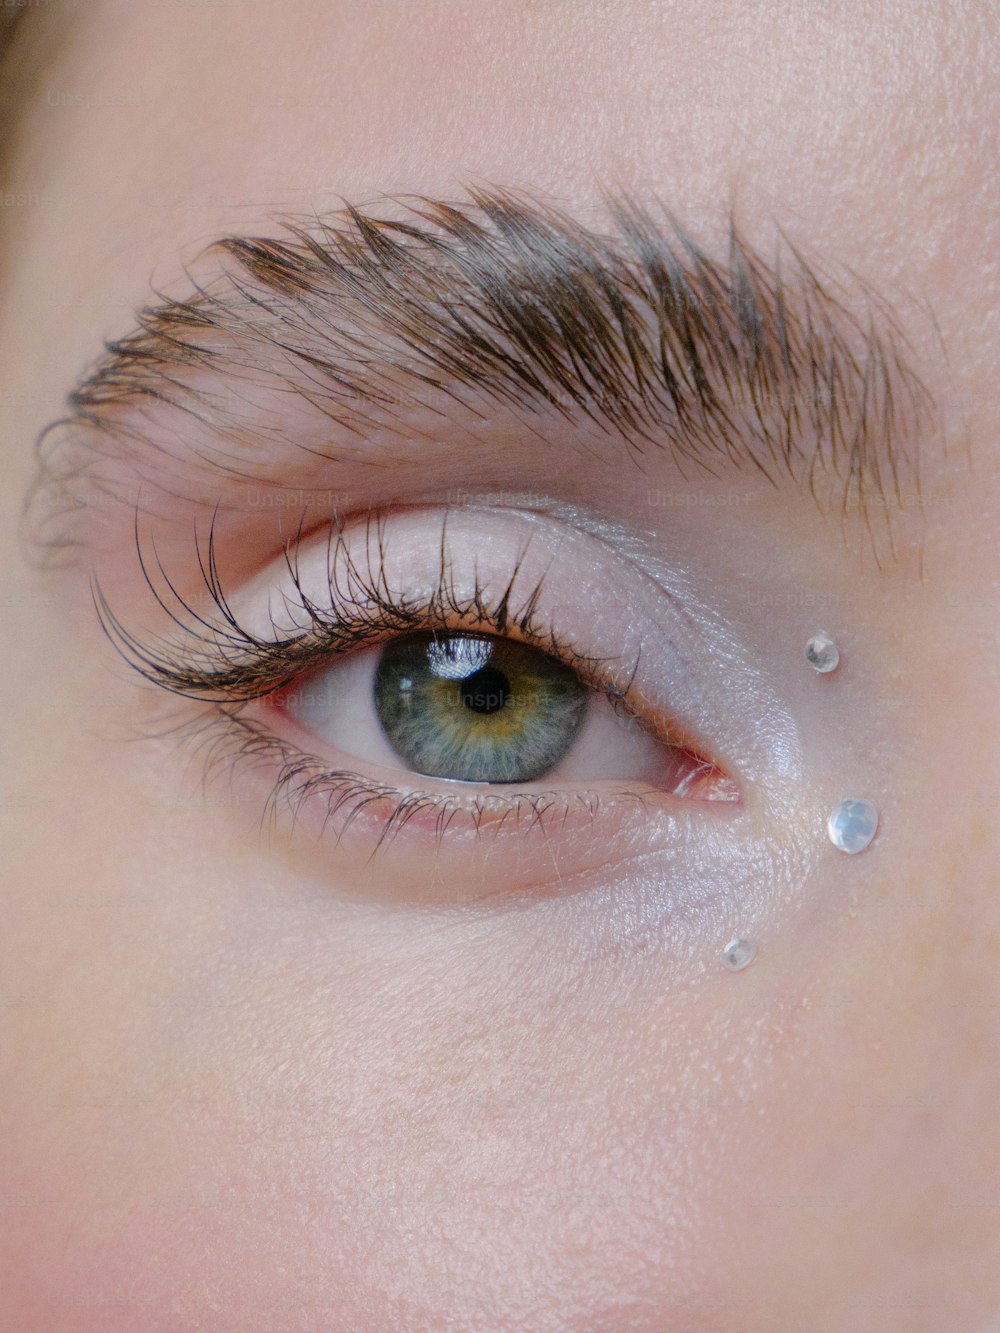 a close up of a person's eye with water drops on it